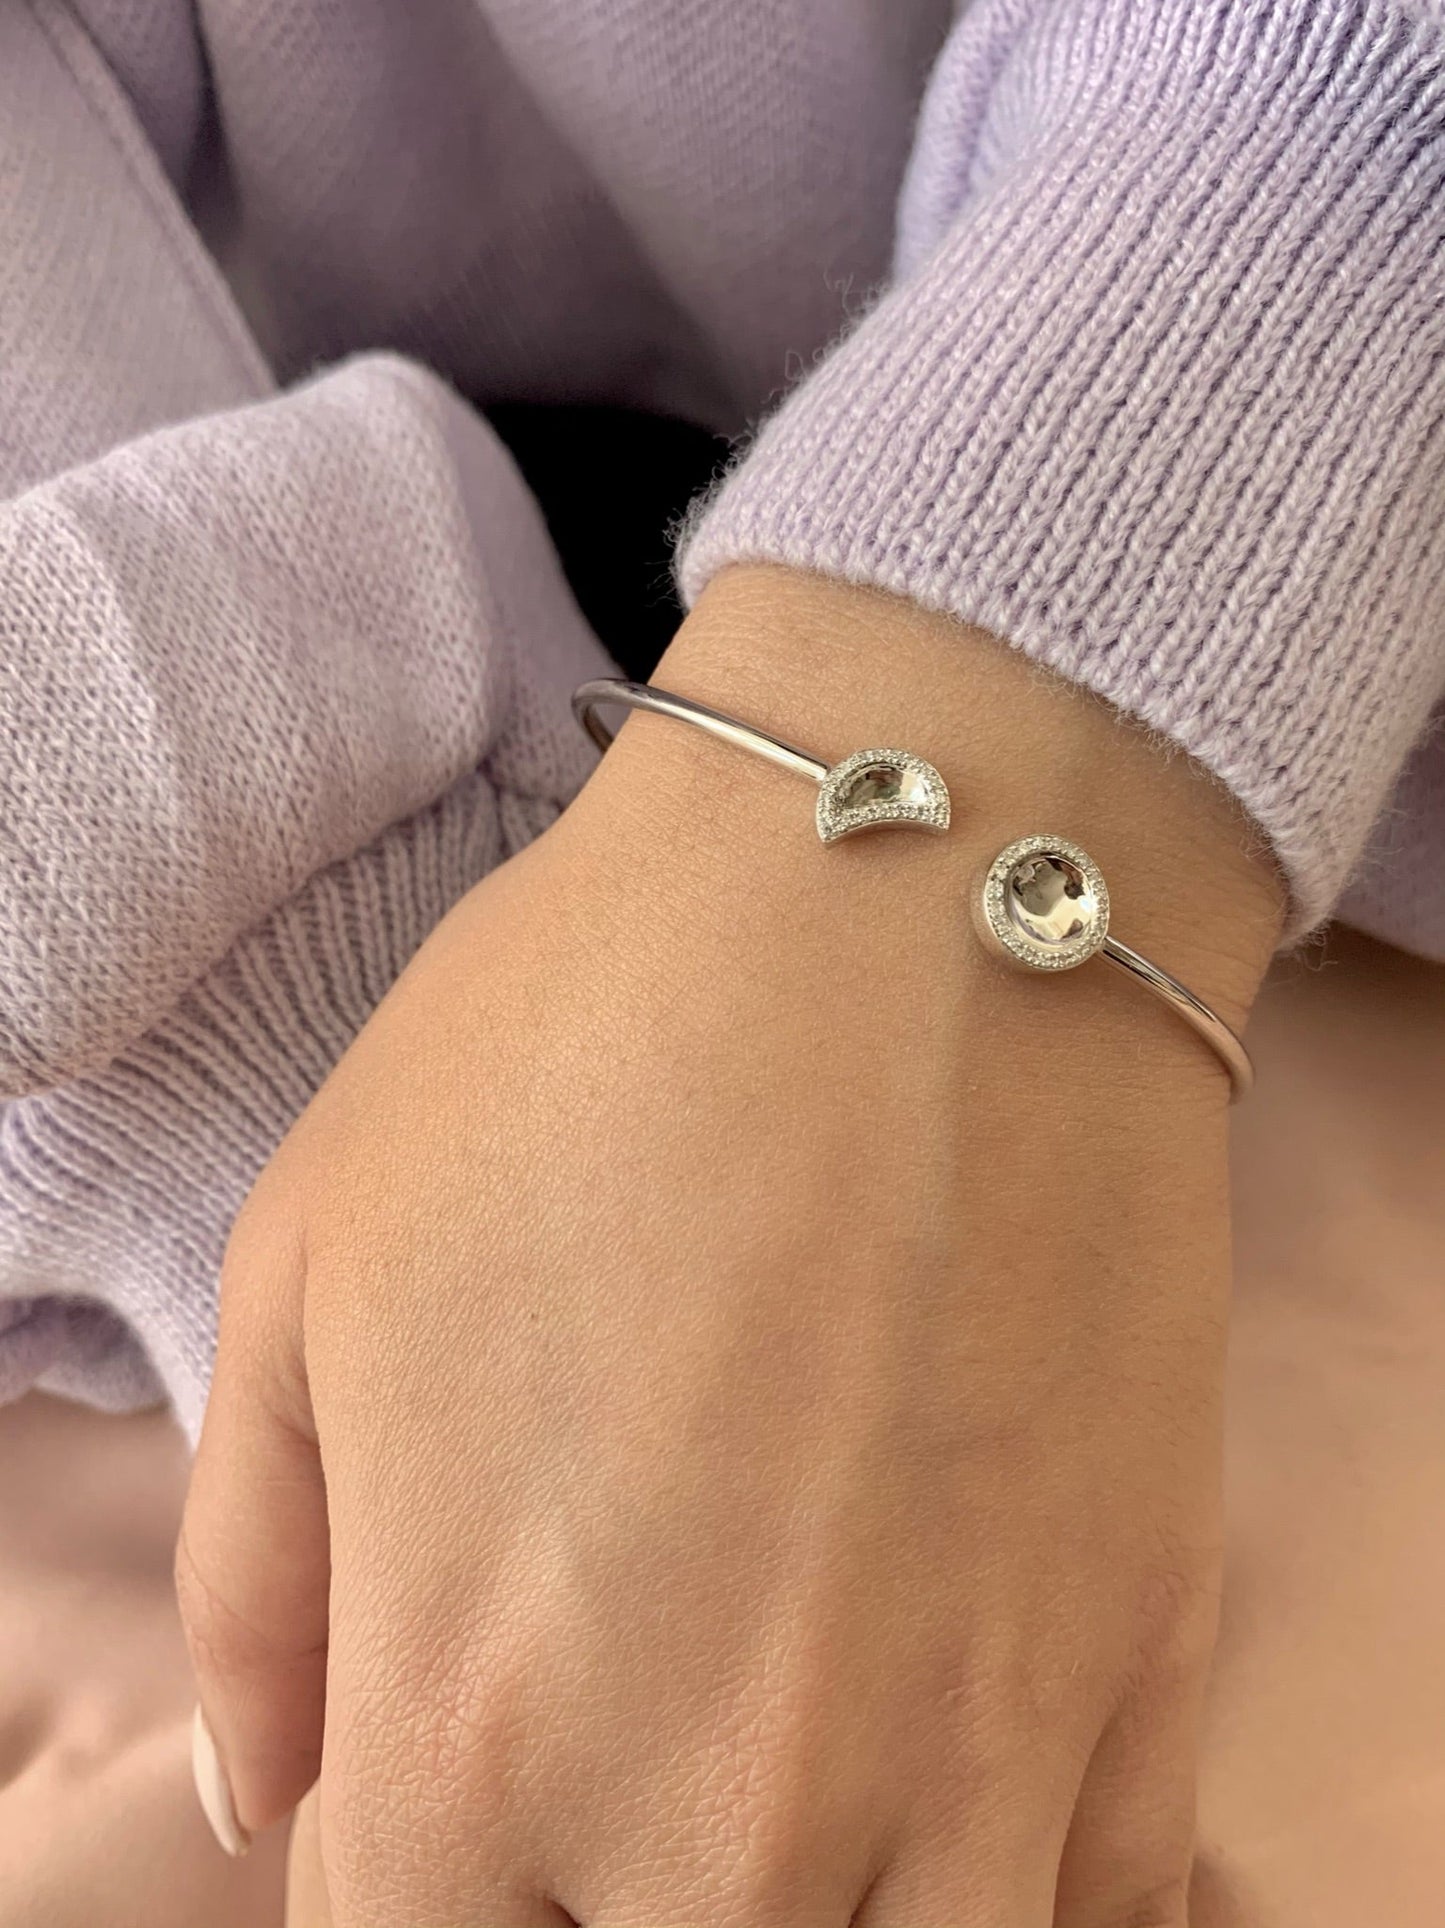 Moon Phases Adjustable Diamond Cuff in Sterling Silver by LuvMyJewelry